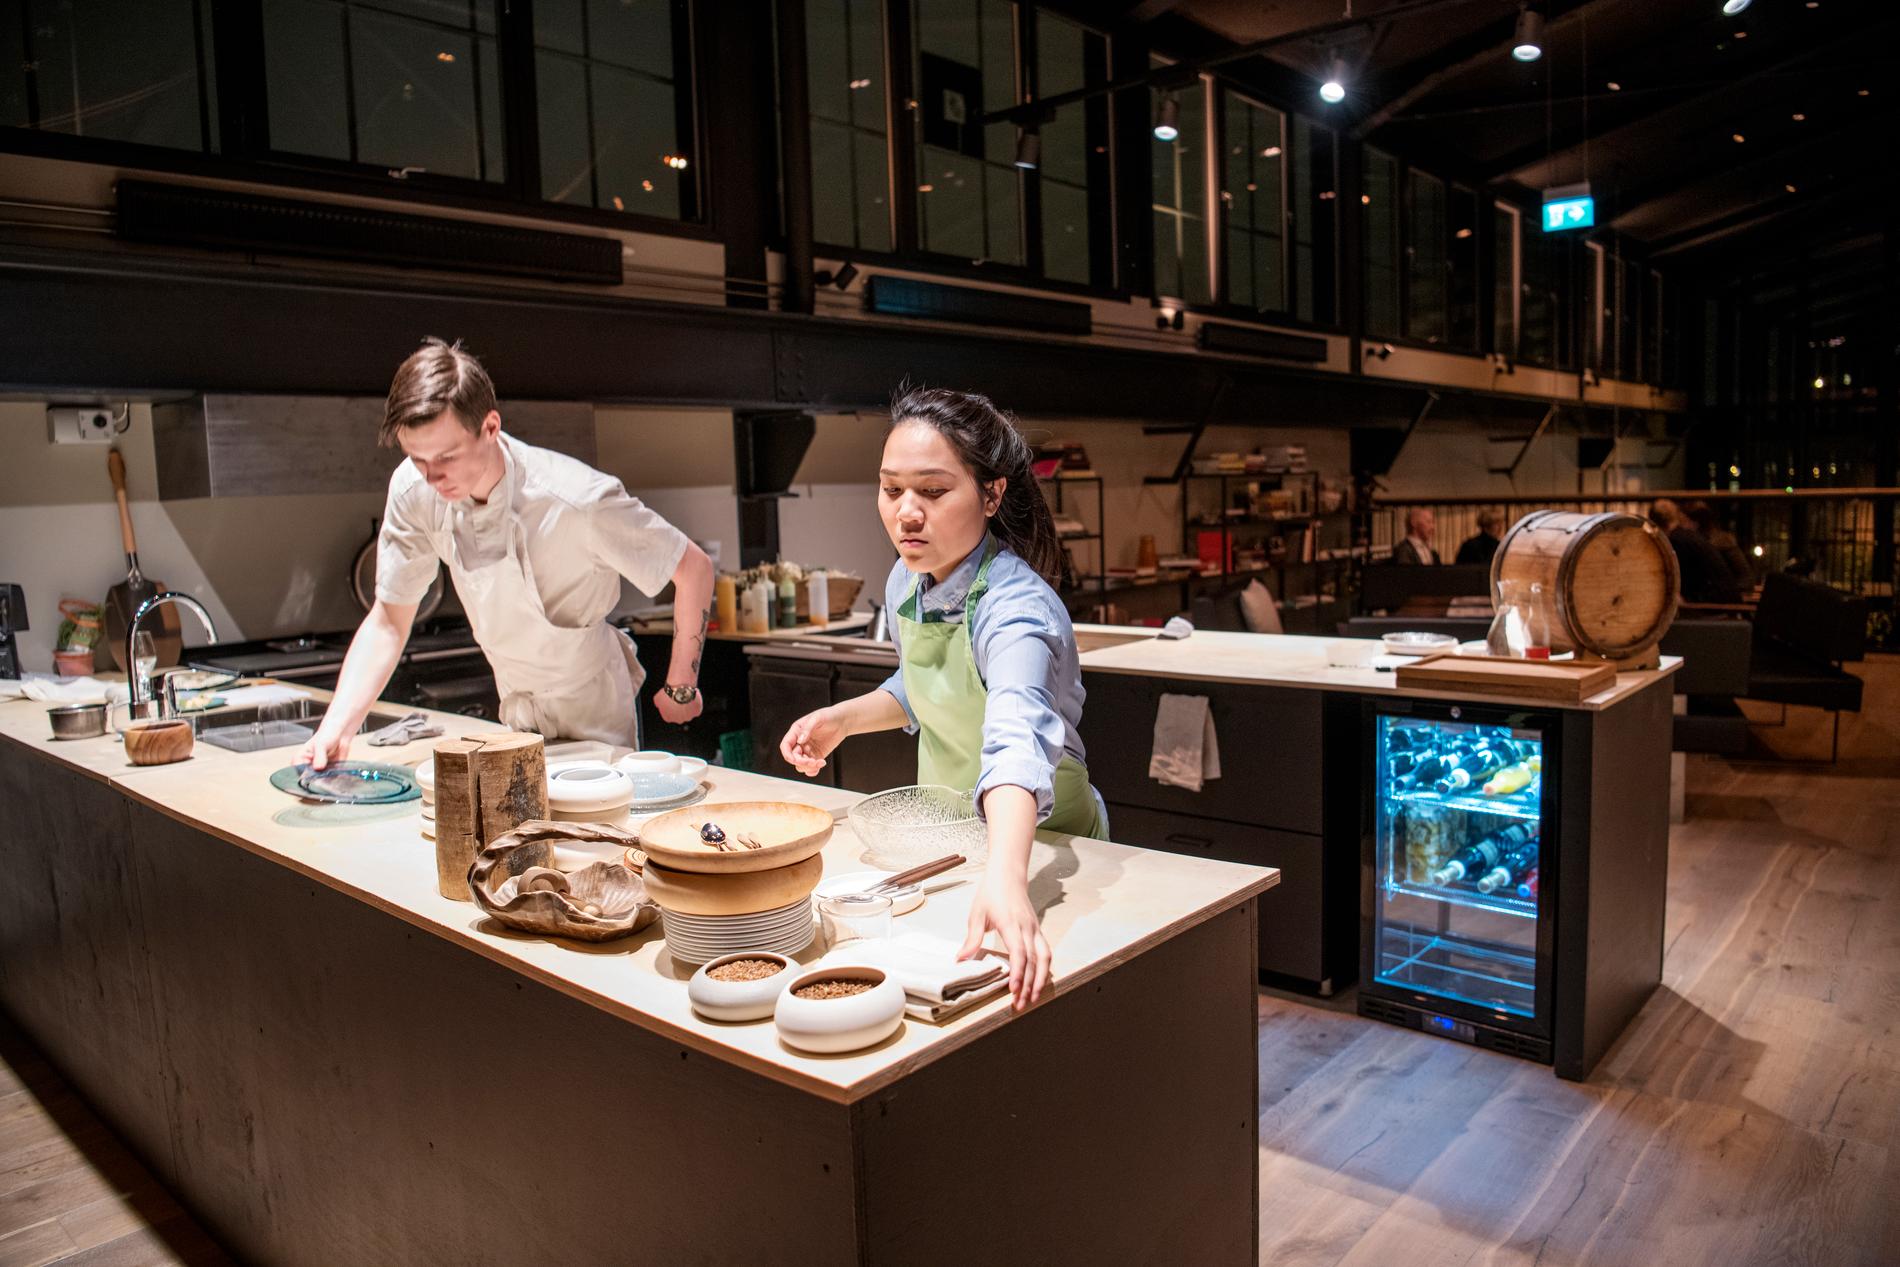 Credo Michelin Restaurant Moves to Oslo’s National Library: Focus on Norwegian Food Culture and Sustainability